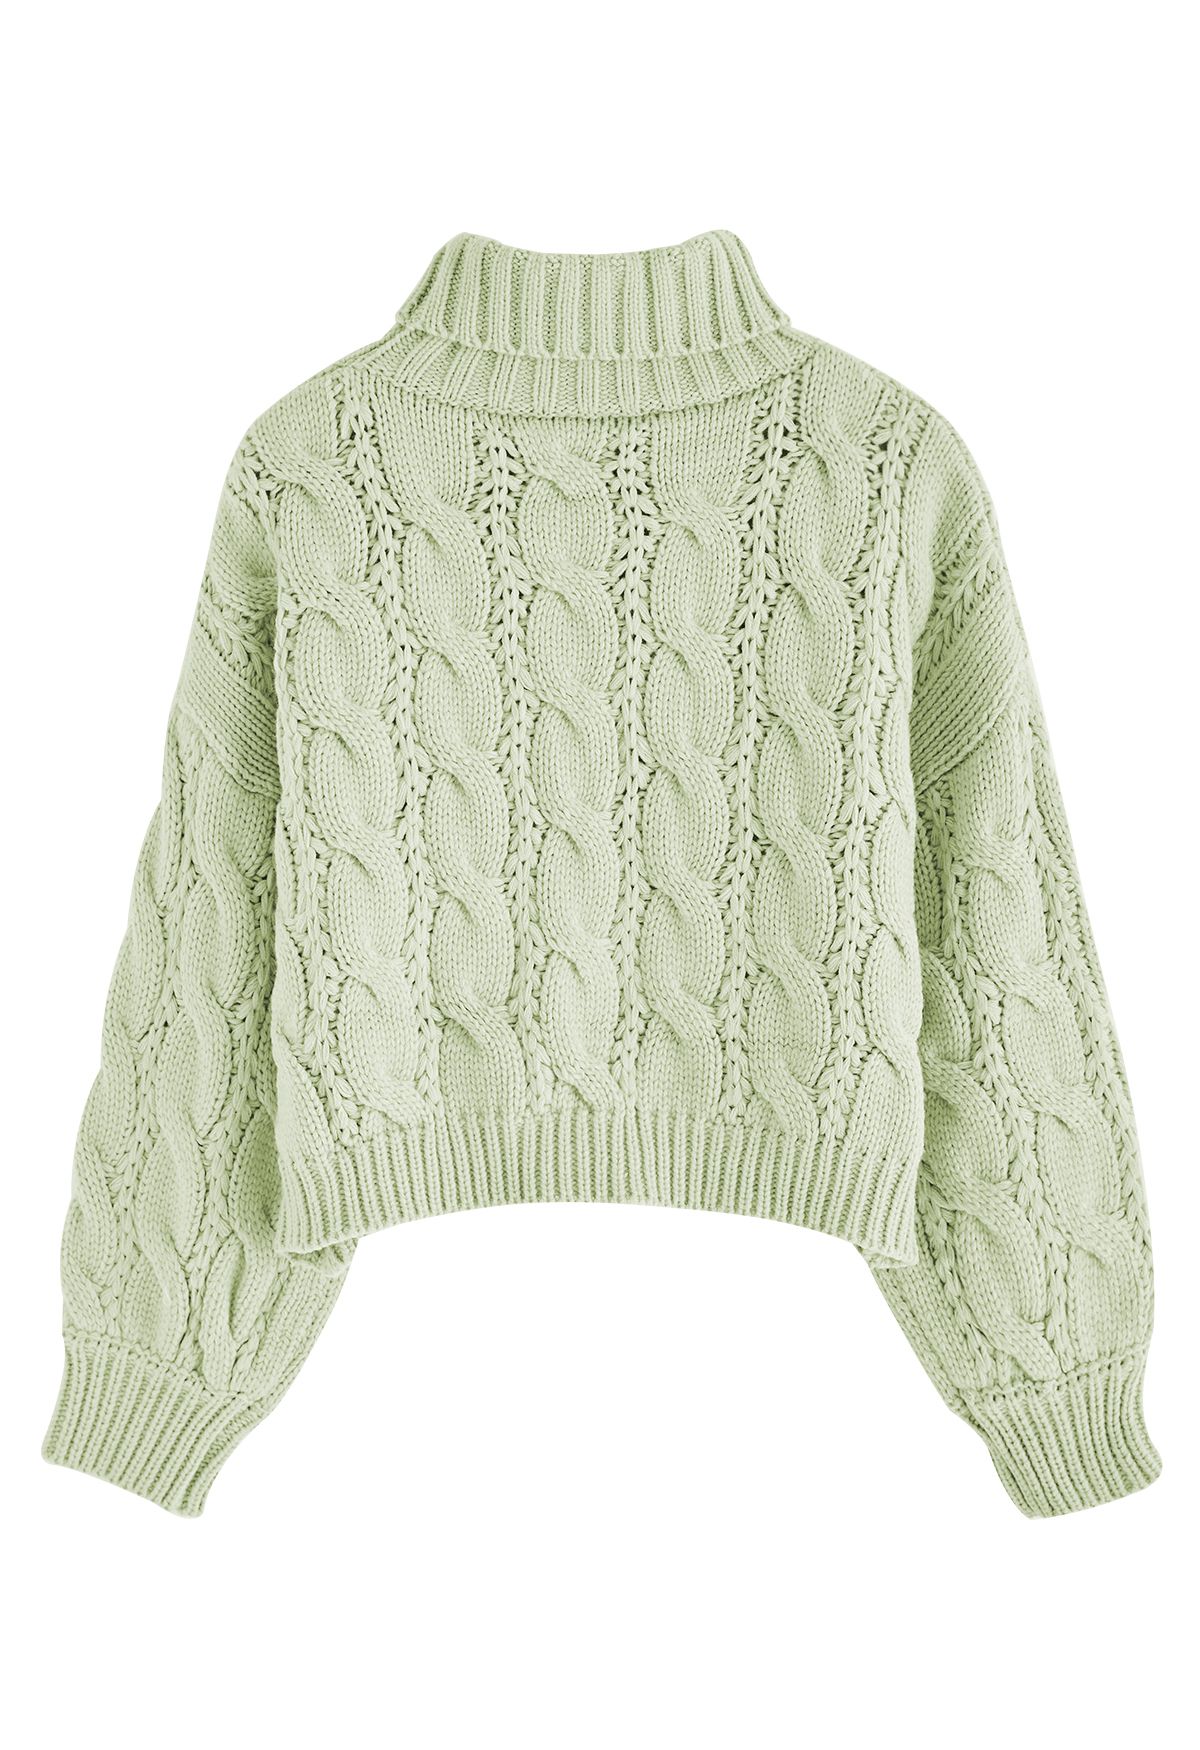 Turtleneck Braid Knit Crop Sweater in Pea Green - Retro, Indie and ...